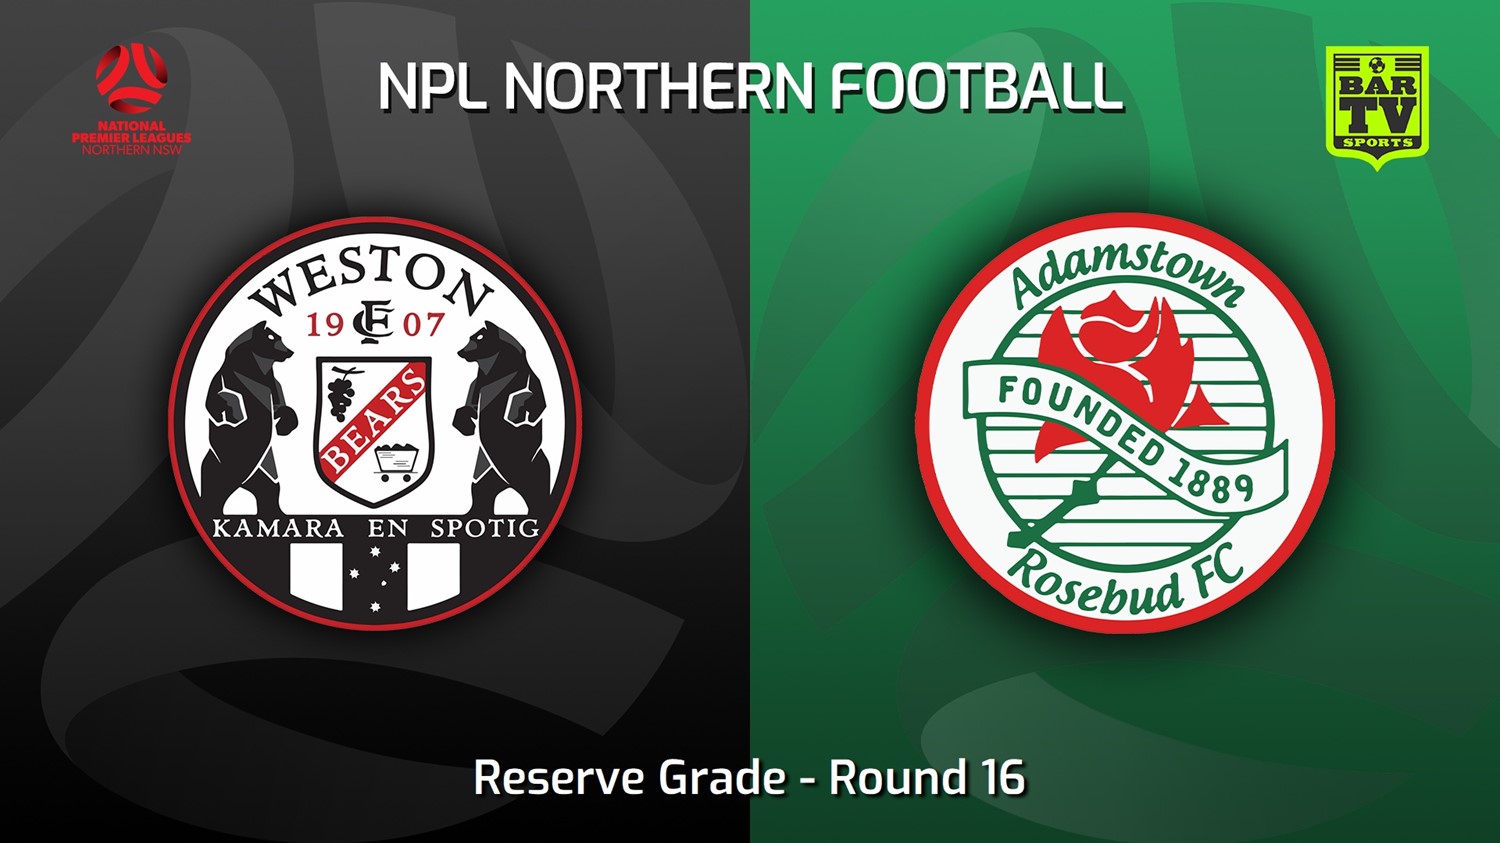 220626-NNSW NPLM Res Round 16 - Weston Workers FC Res v Adamstown Rosebud FC Res Minigame Slate Image